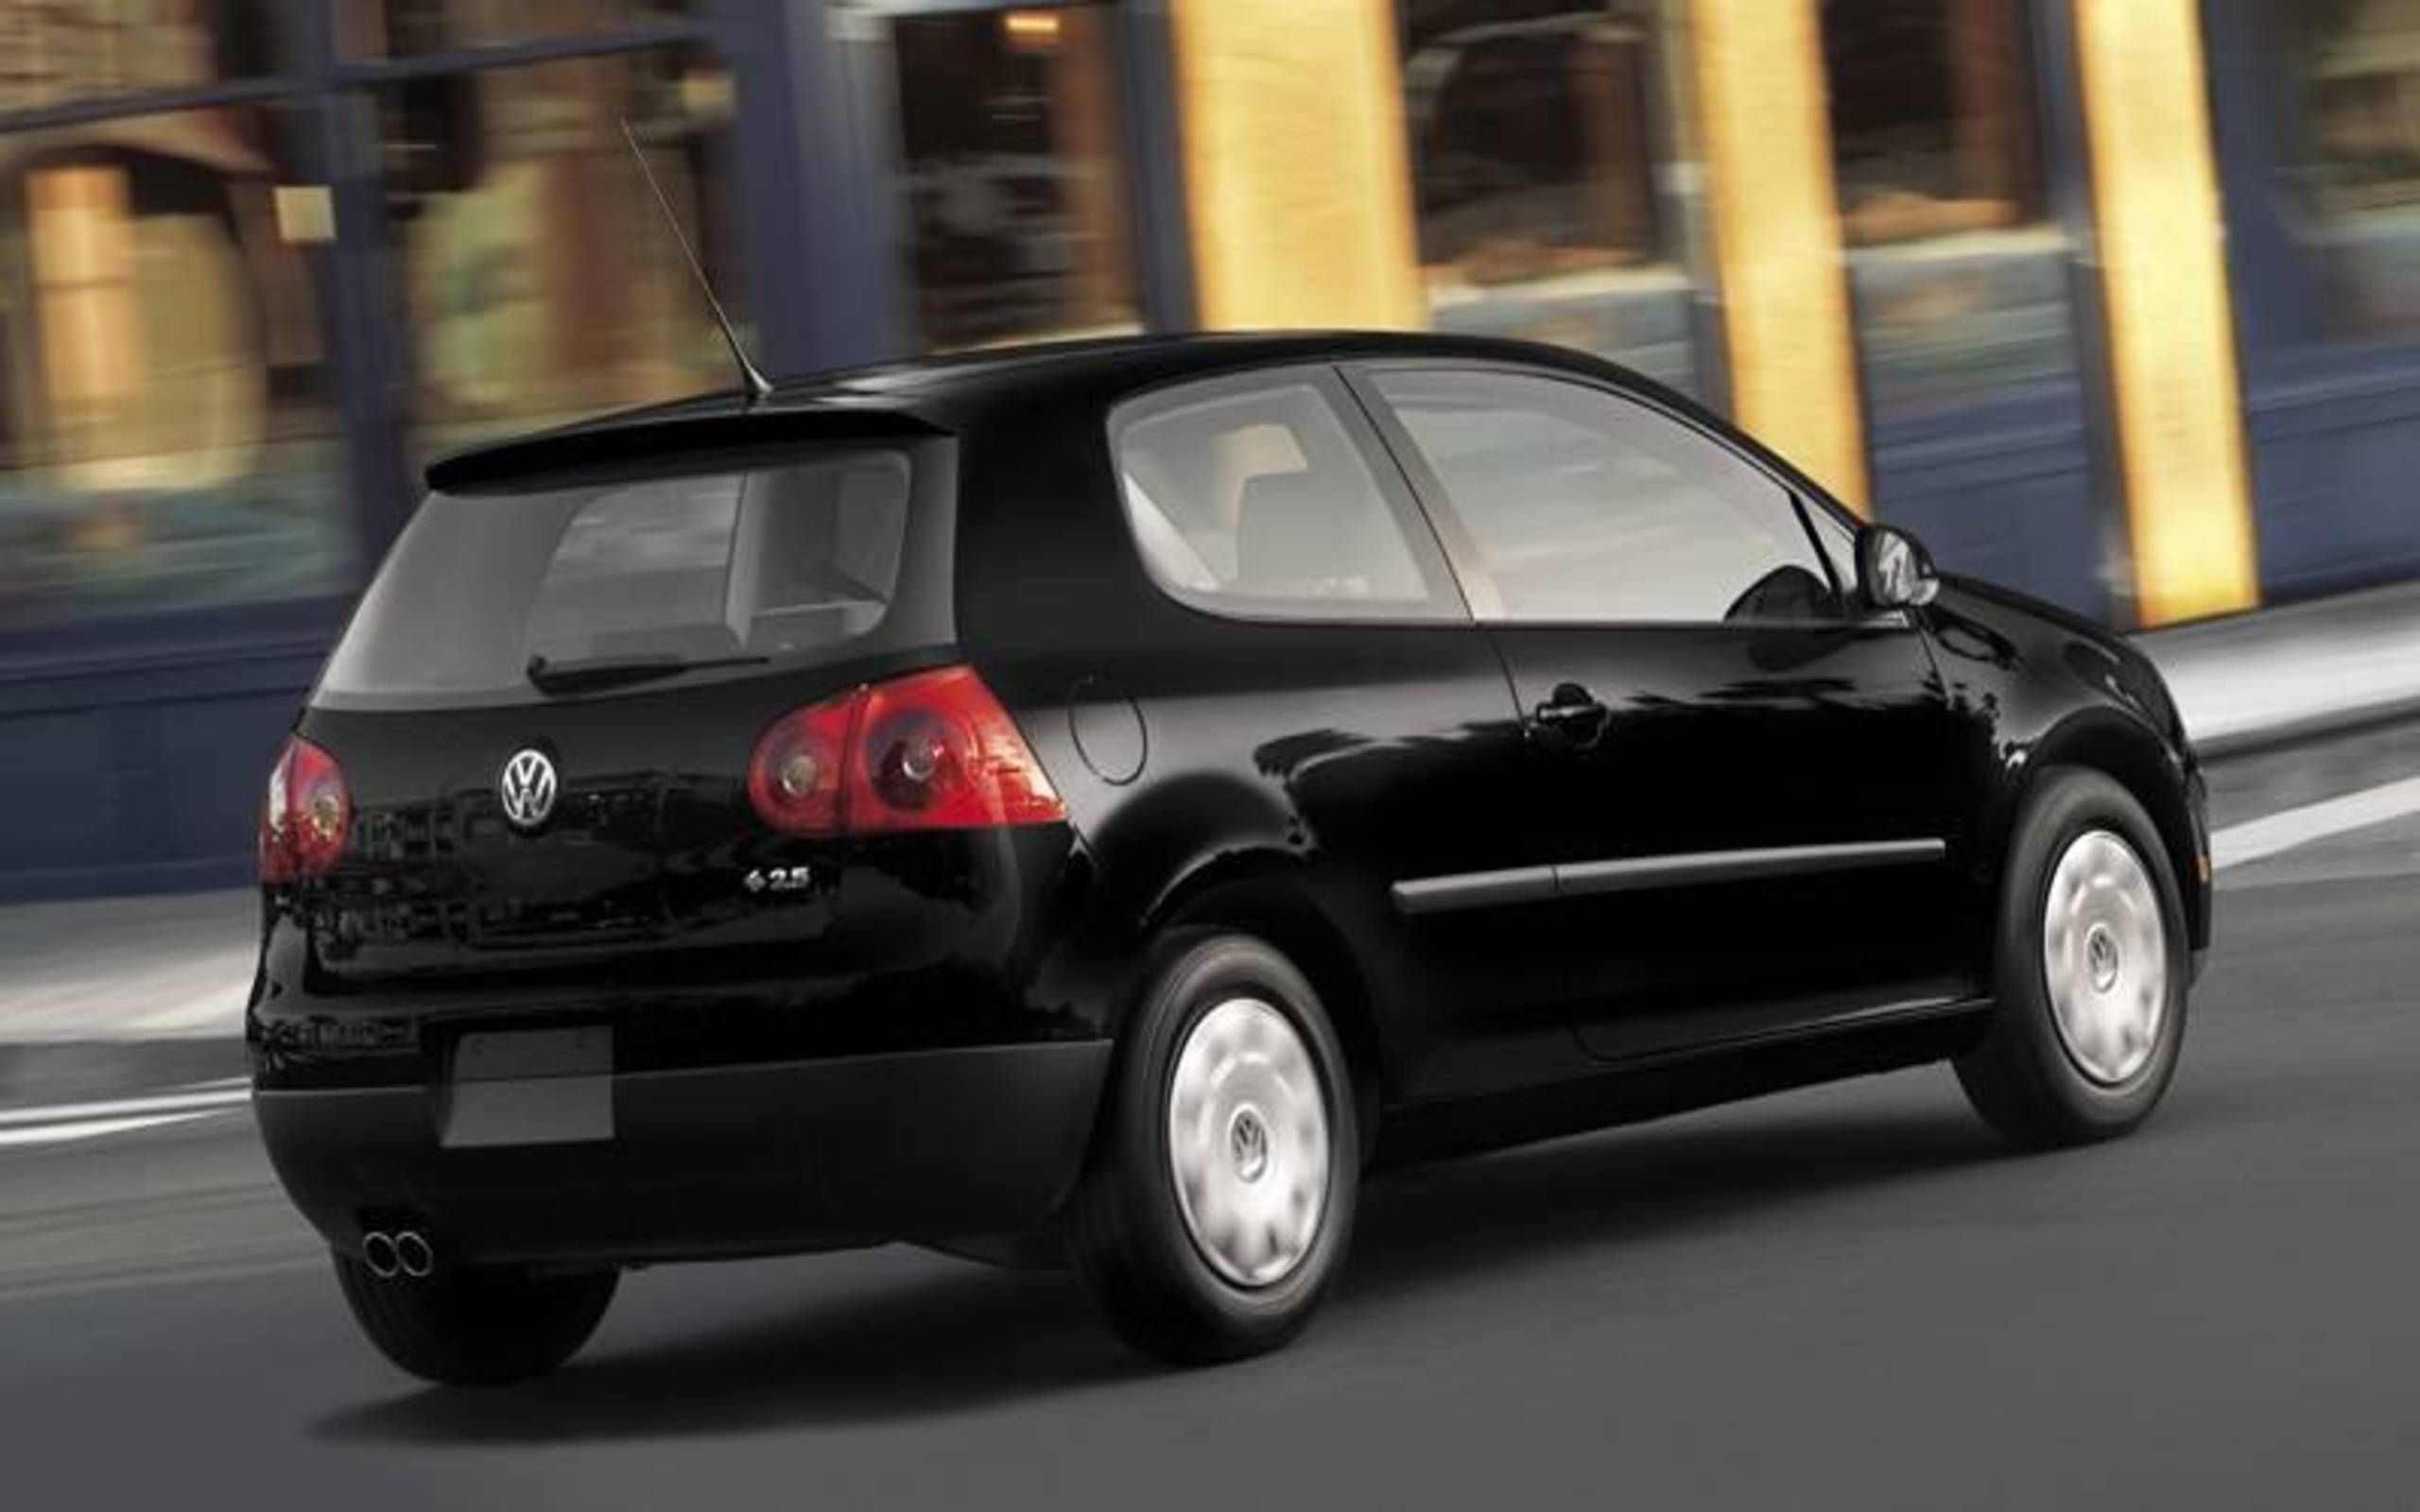 2006 Volkswagen Rabbit: Rabbit Redux: VW revives a name, and remembers  “Volks,” too